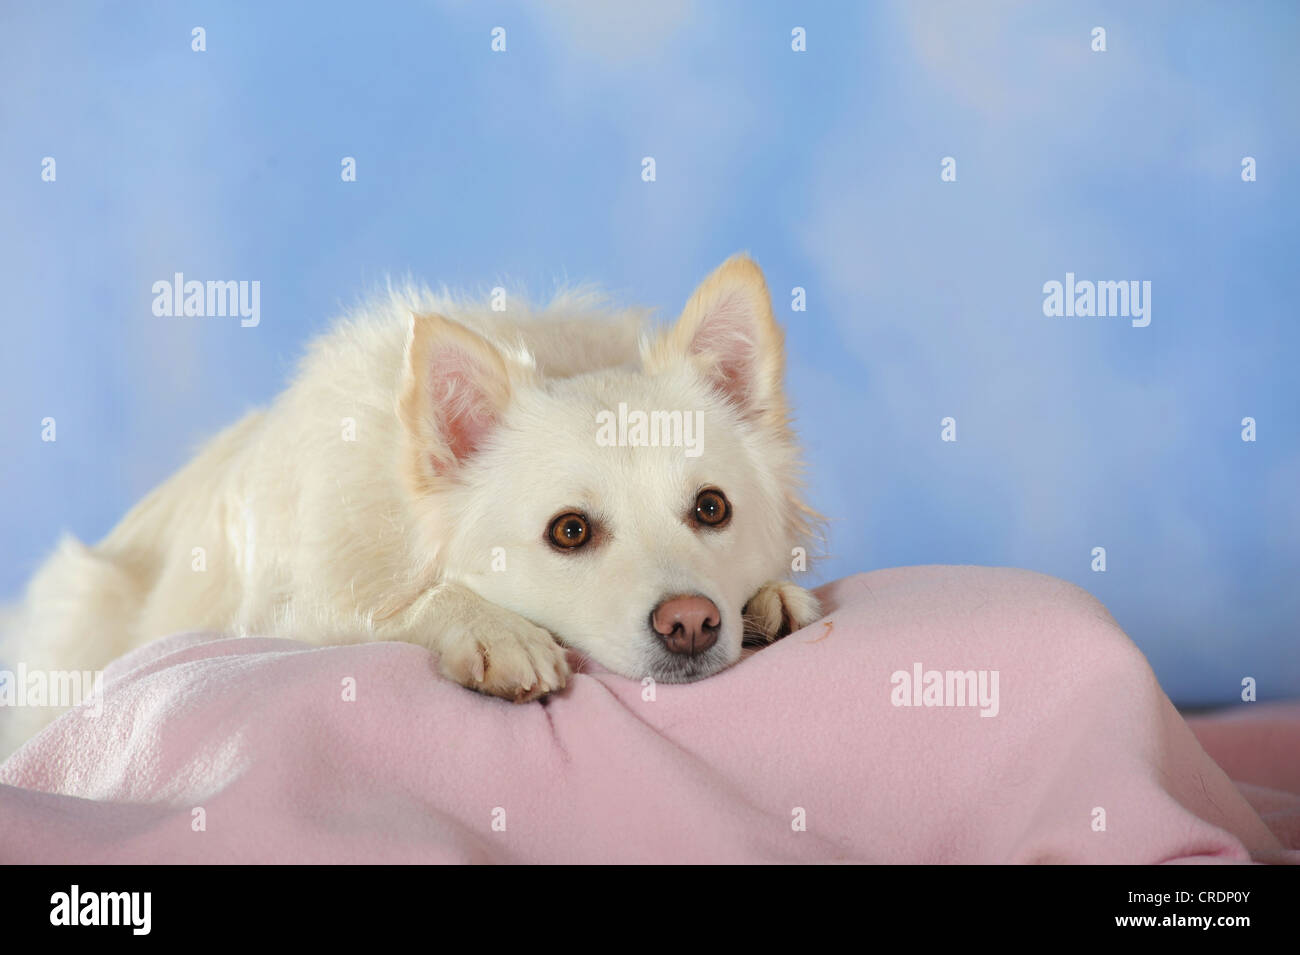 Spitz crossbreed lying on a pink blanket with its head between its paws Stock Photo